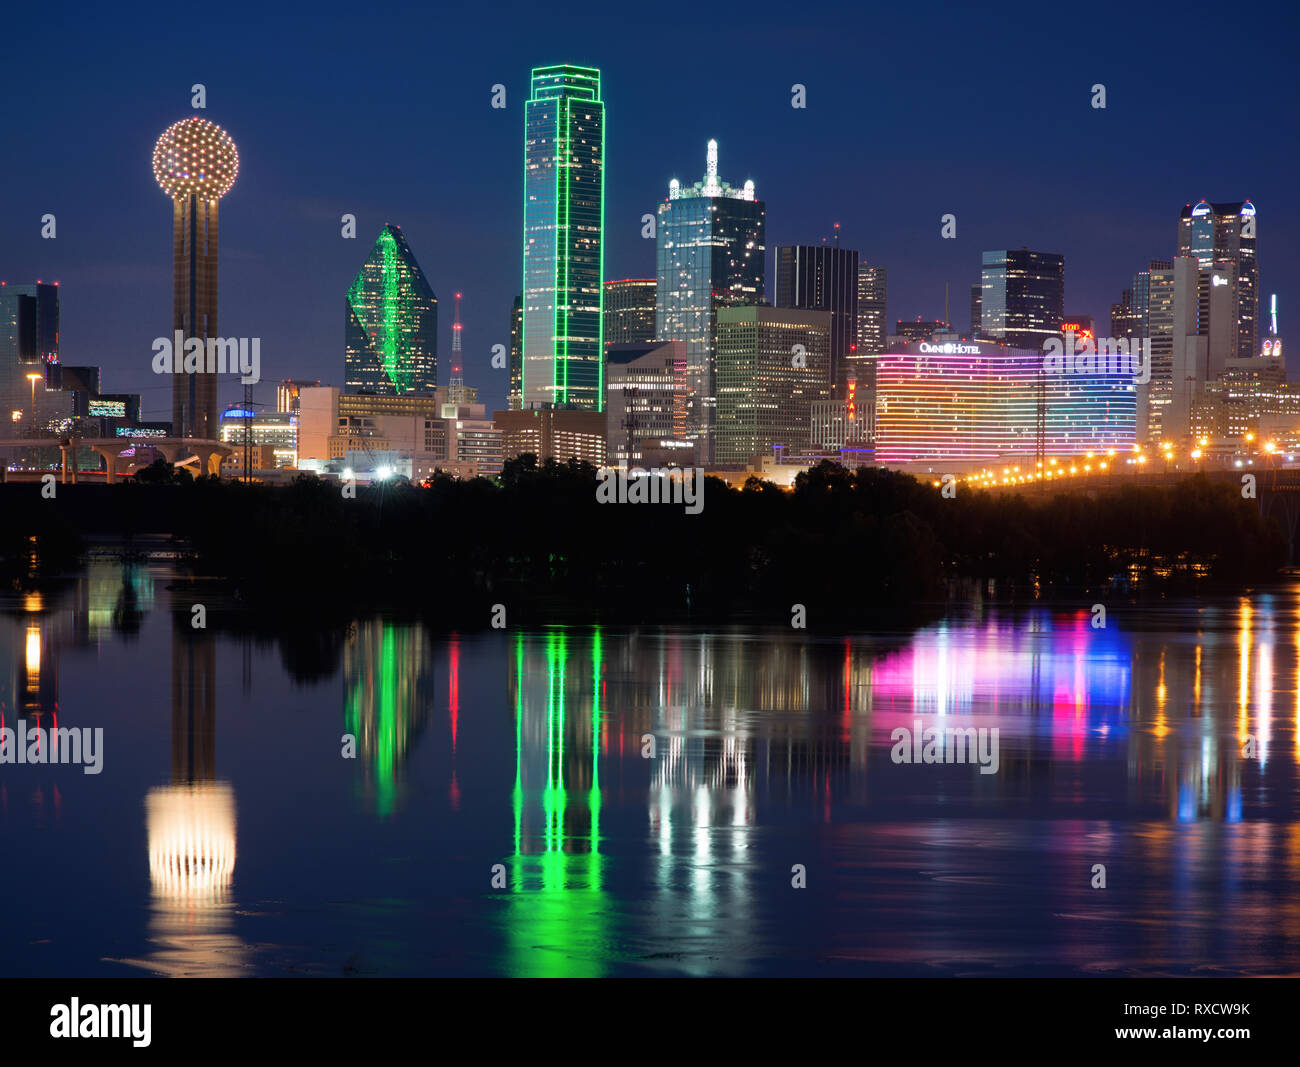 Dallas Colorful Skyline at night with River Reflection 31119 Stock Photo